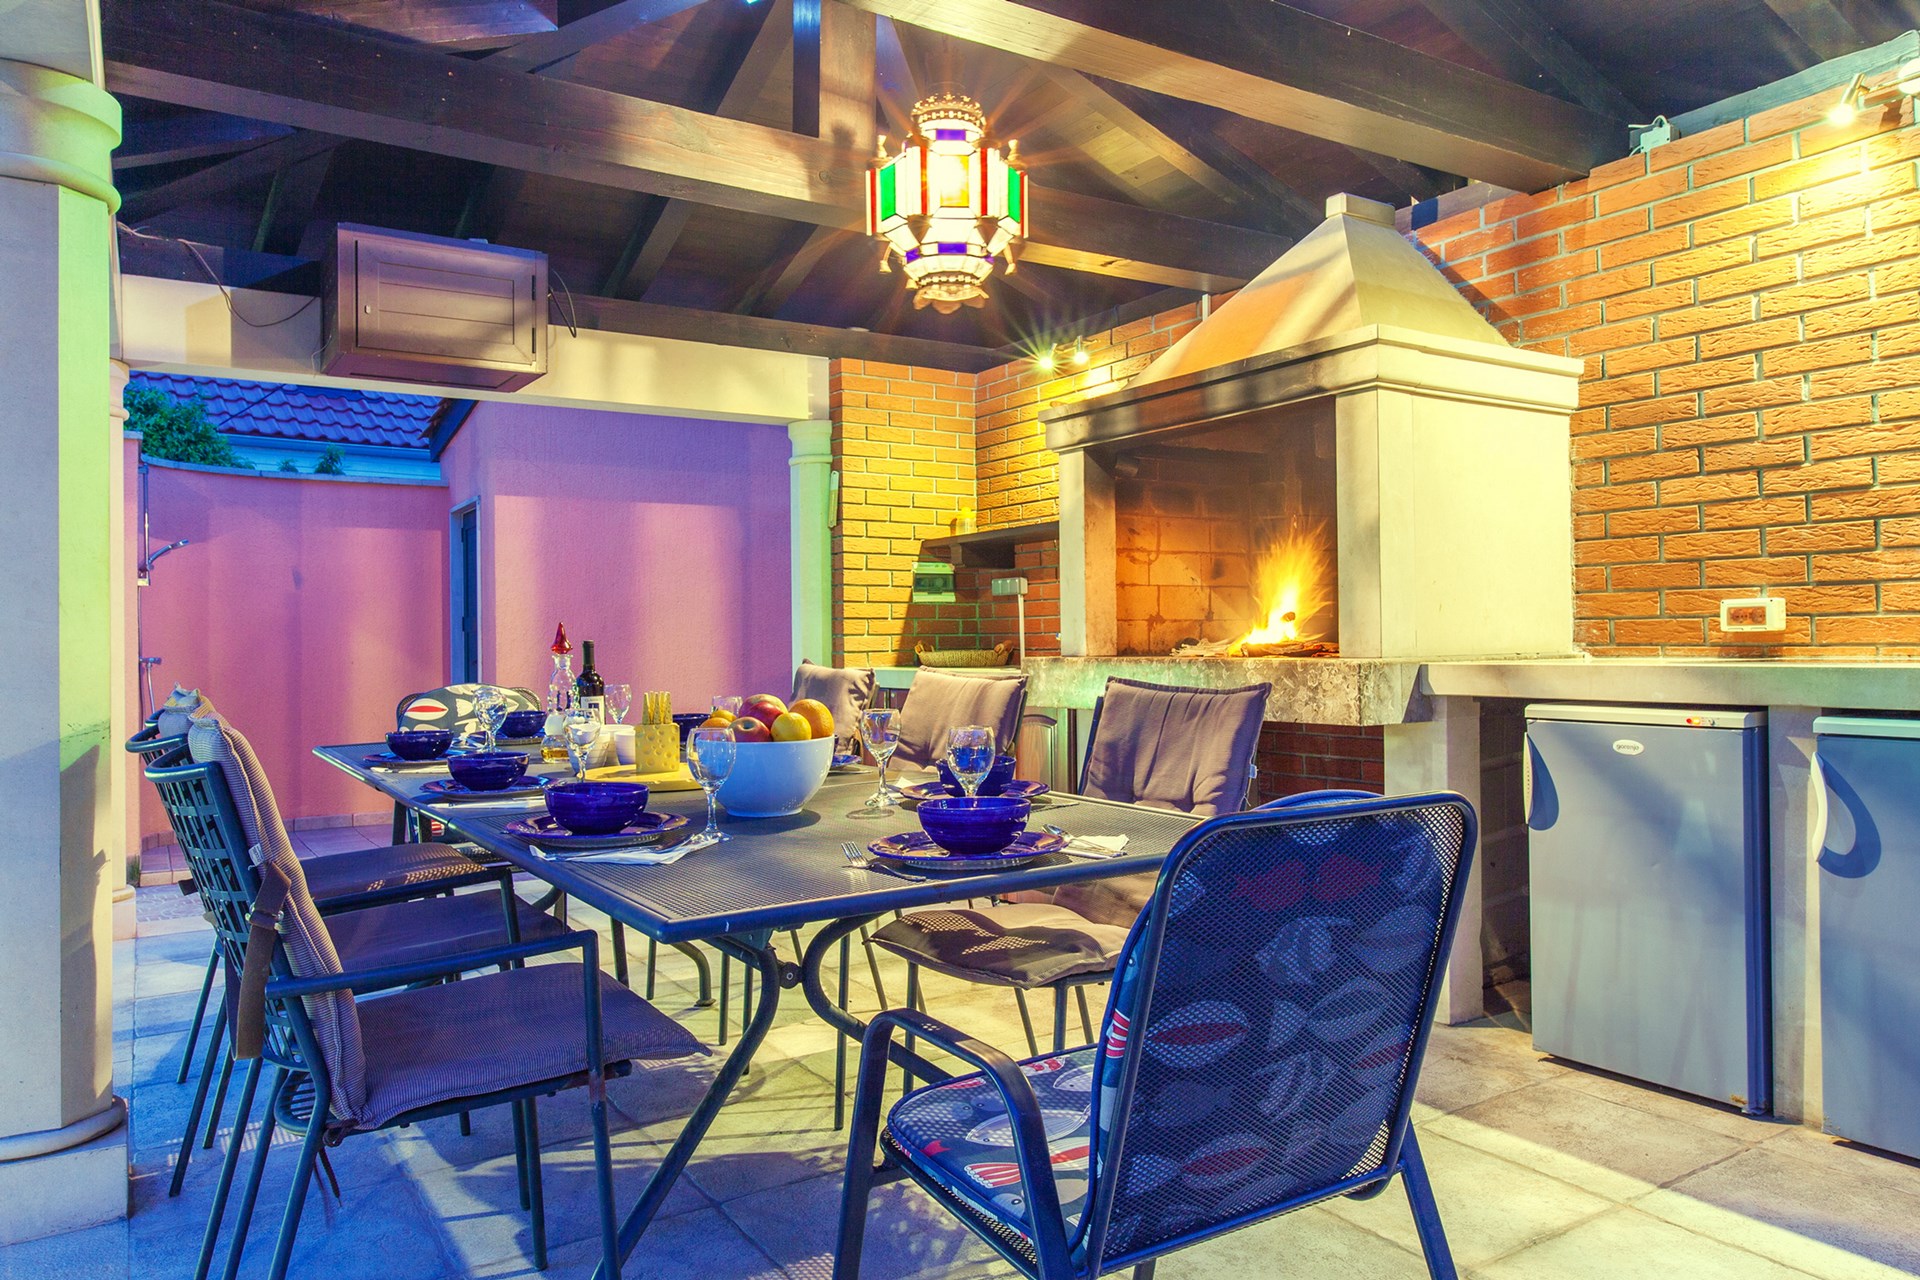 Dinner time at the covered outdoor area with open fireplace